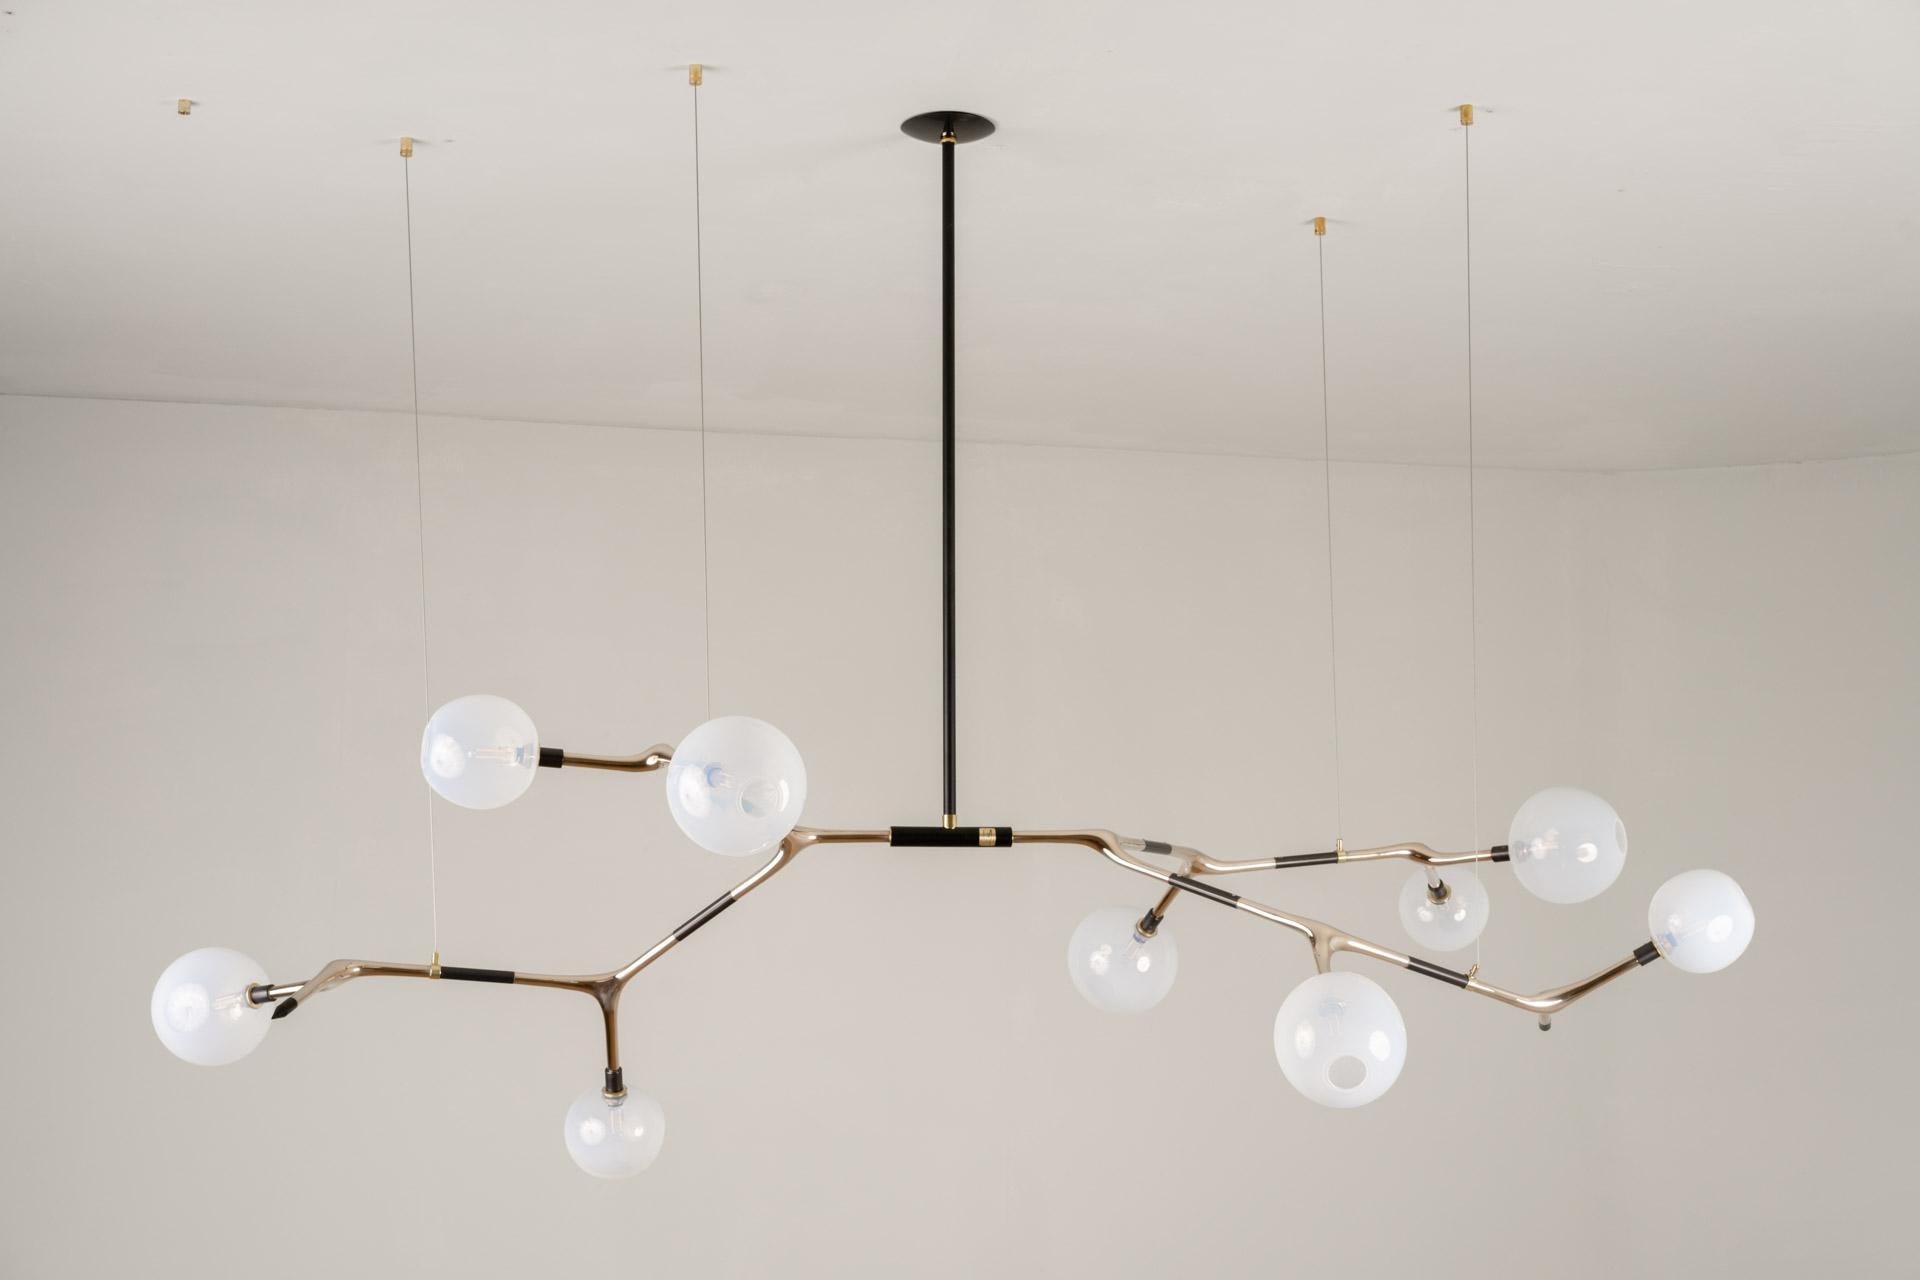 MANTIS 9 pendant light was designed for the Mol collection by Mexican artist Isabel Moncada.

Mantis 9, discreet and elegant with measured dimensions. For a medium and sober table, the Mantis 9 is the key element in a reception area, a living room